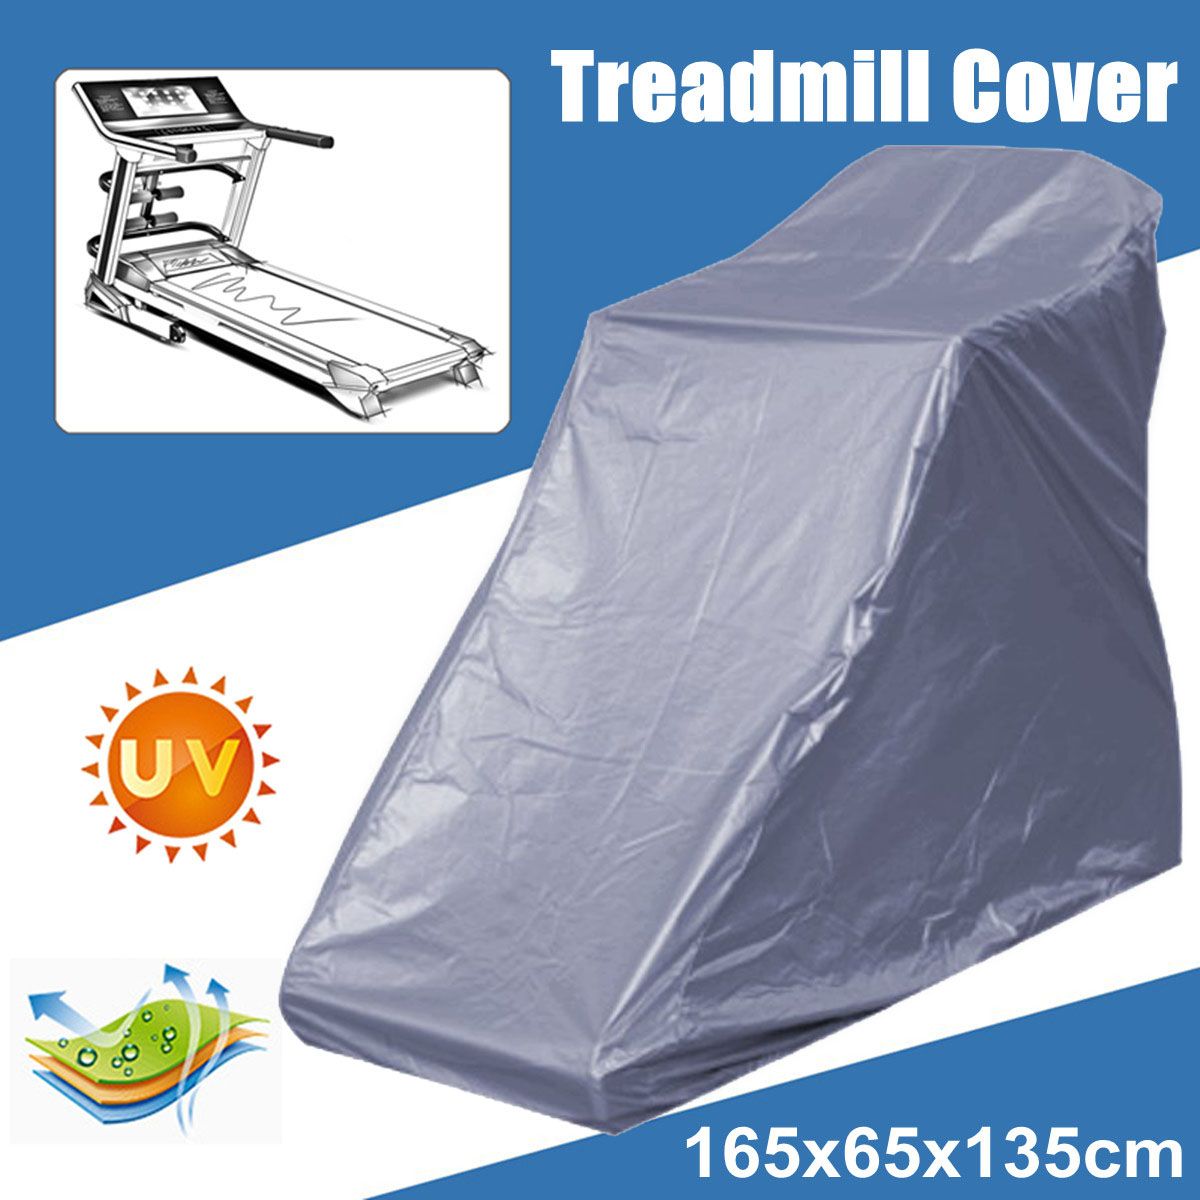 165x65x135cm-Waterproof-Treadmill-Cover-Running-Jogging-Machine-Dust-Shelter-Protection--1351838